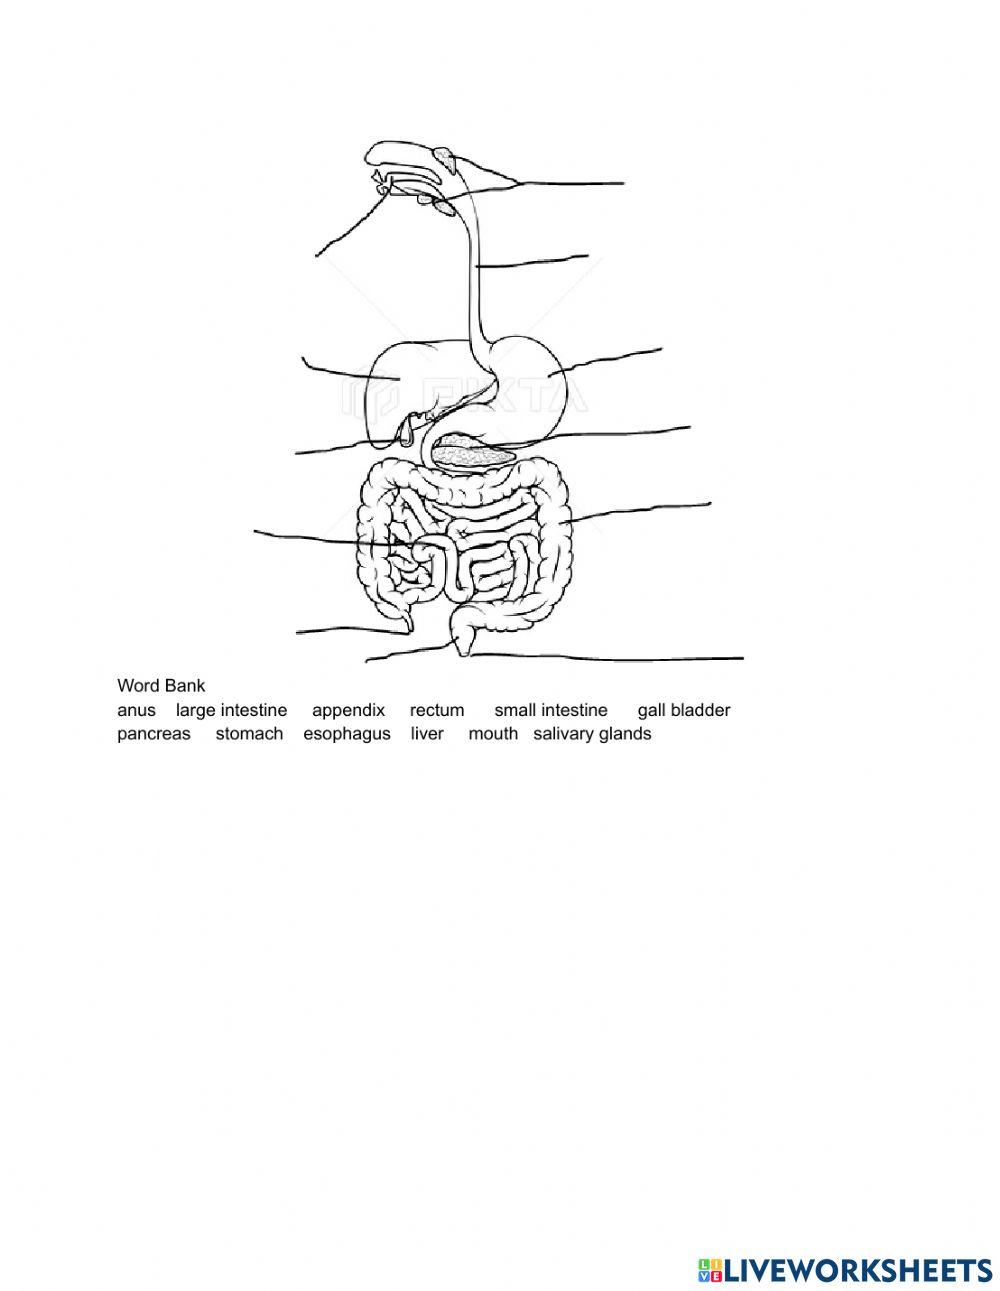 The Digestive System Diagram